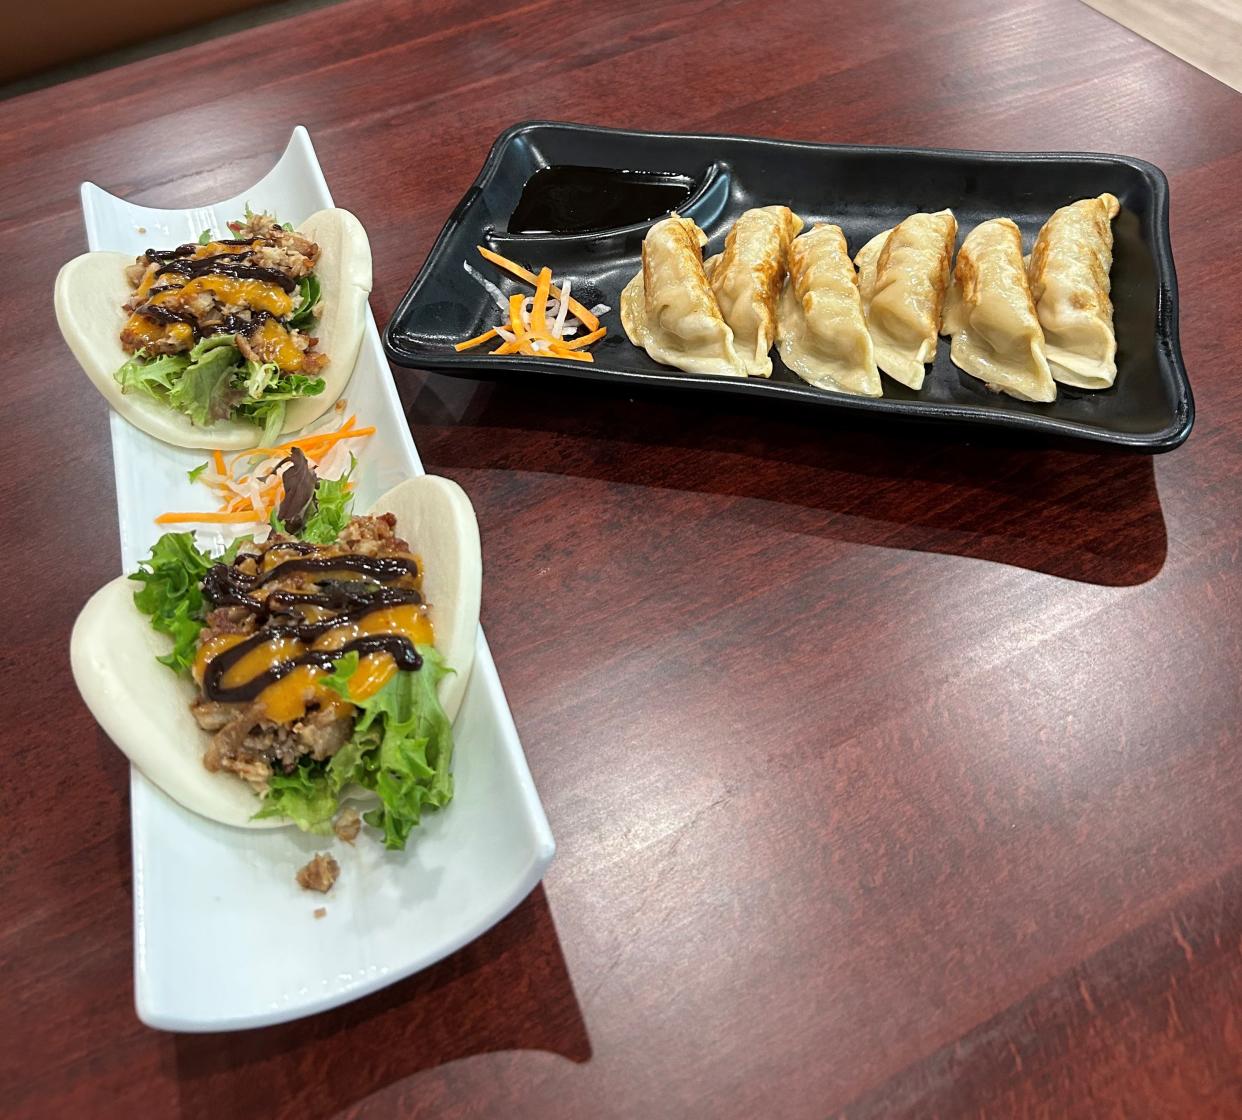 Appetizers at Noodle King include moo shu pork belly buns, at left, and pan-fried gyoza dumplings.